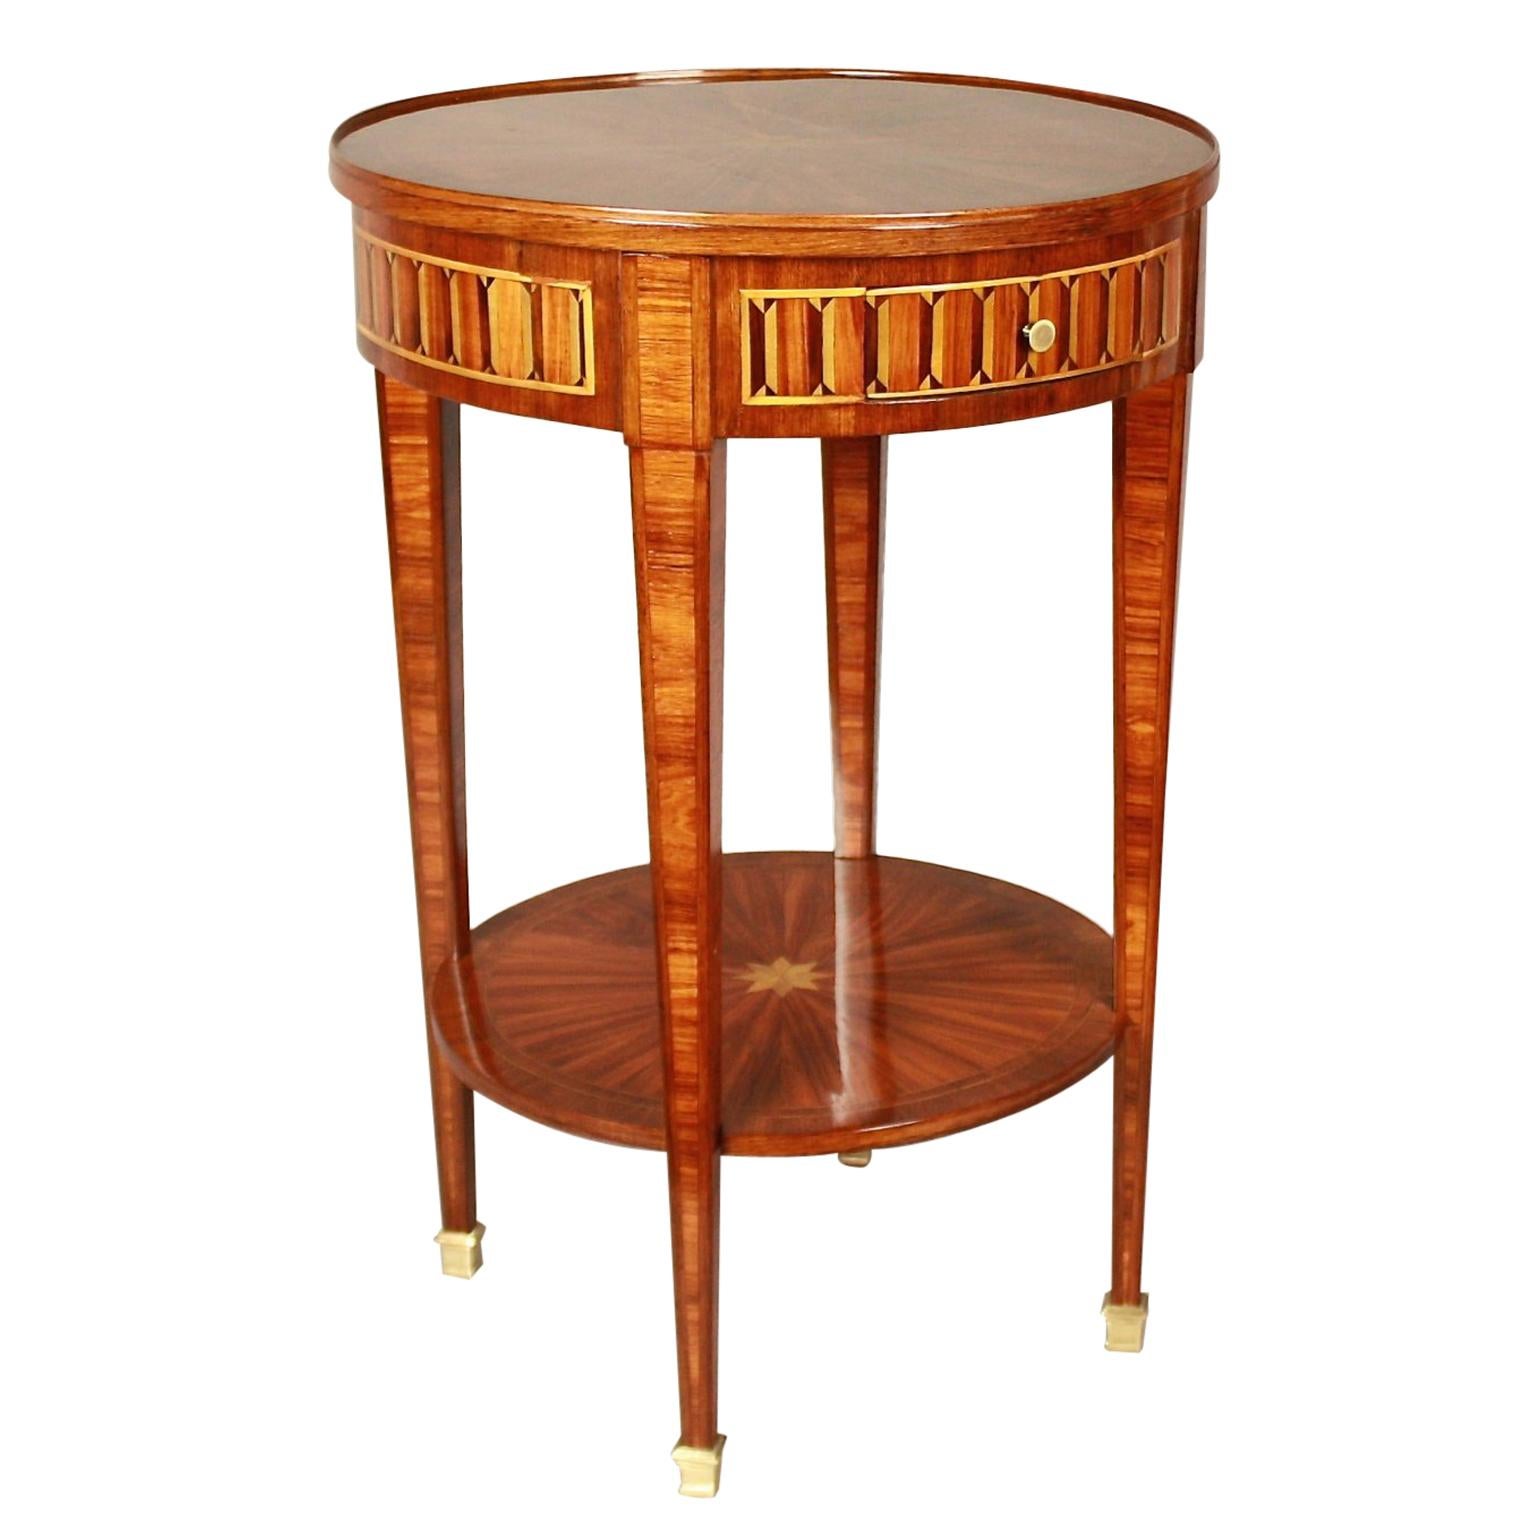 Small French 19th Century Louis XVI Style Marquetry Side Table or Gueridon